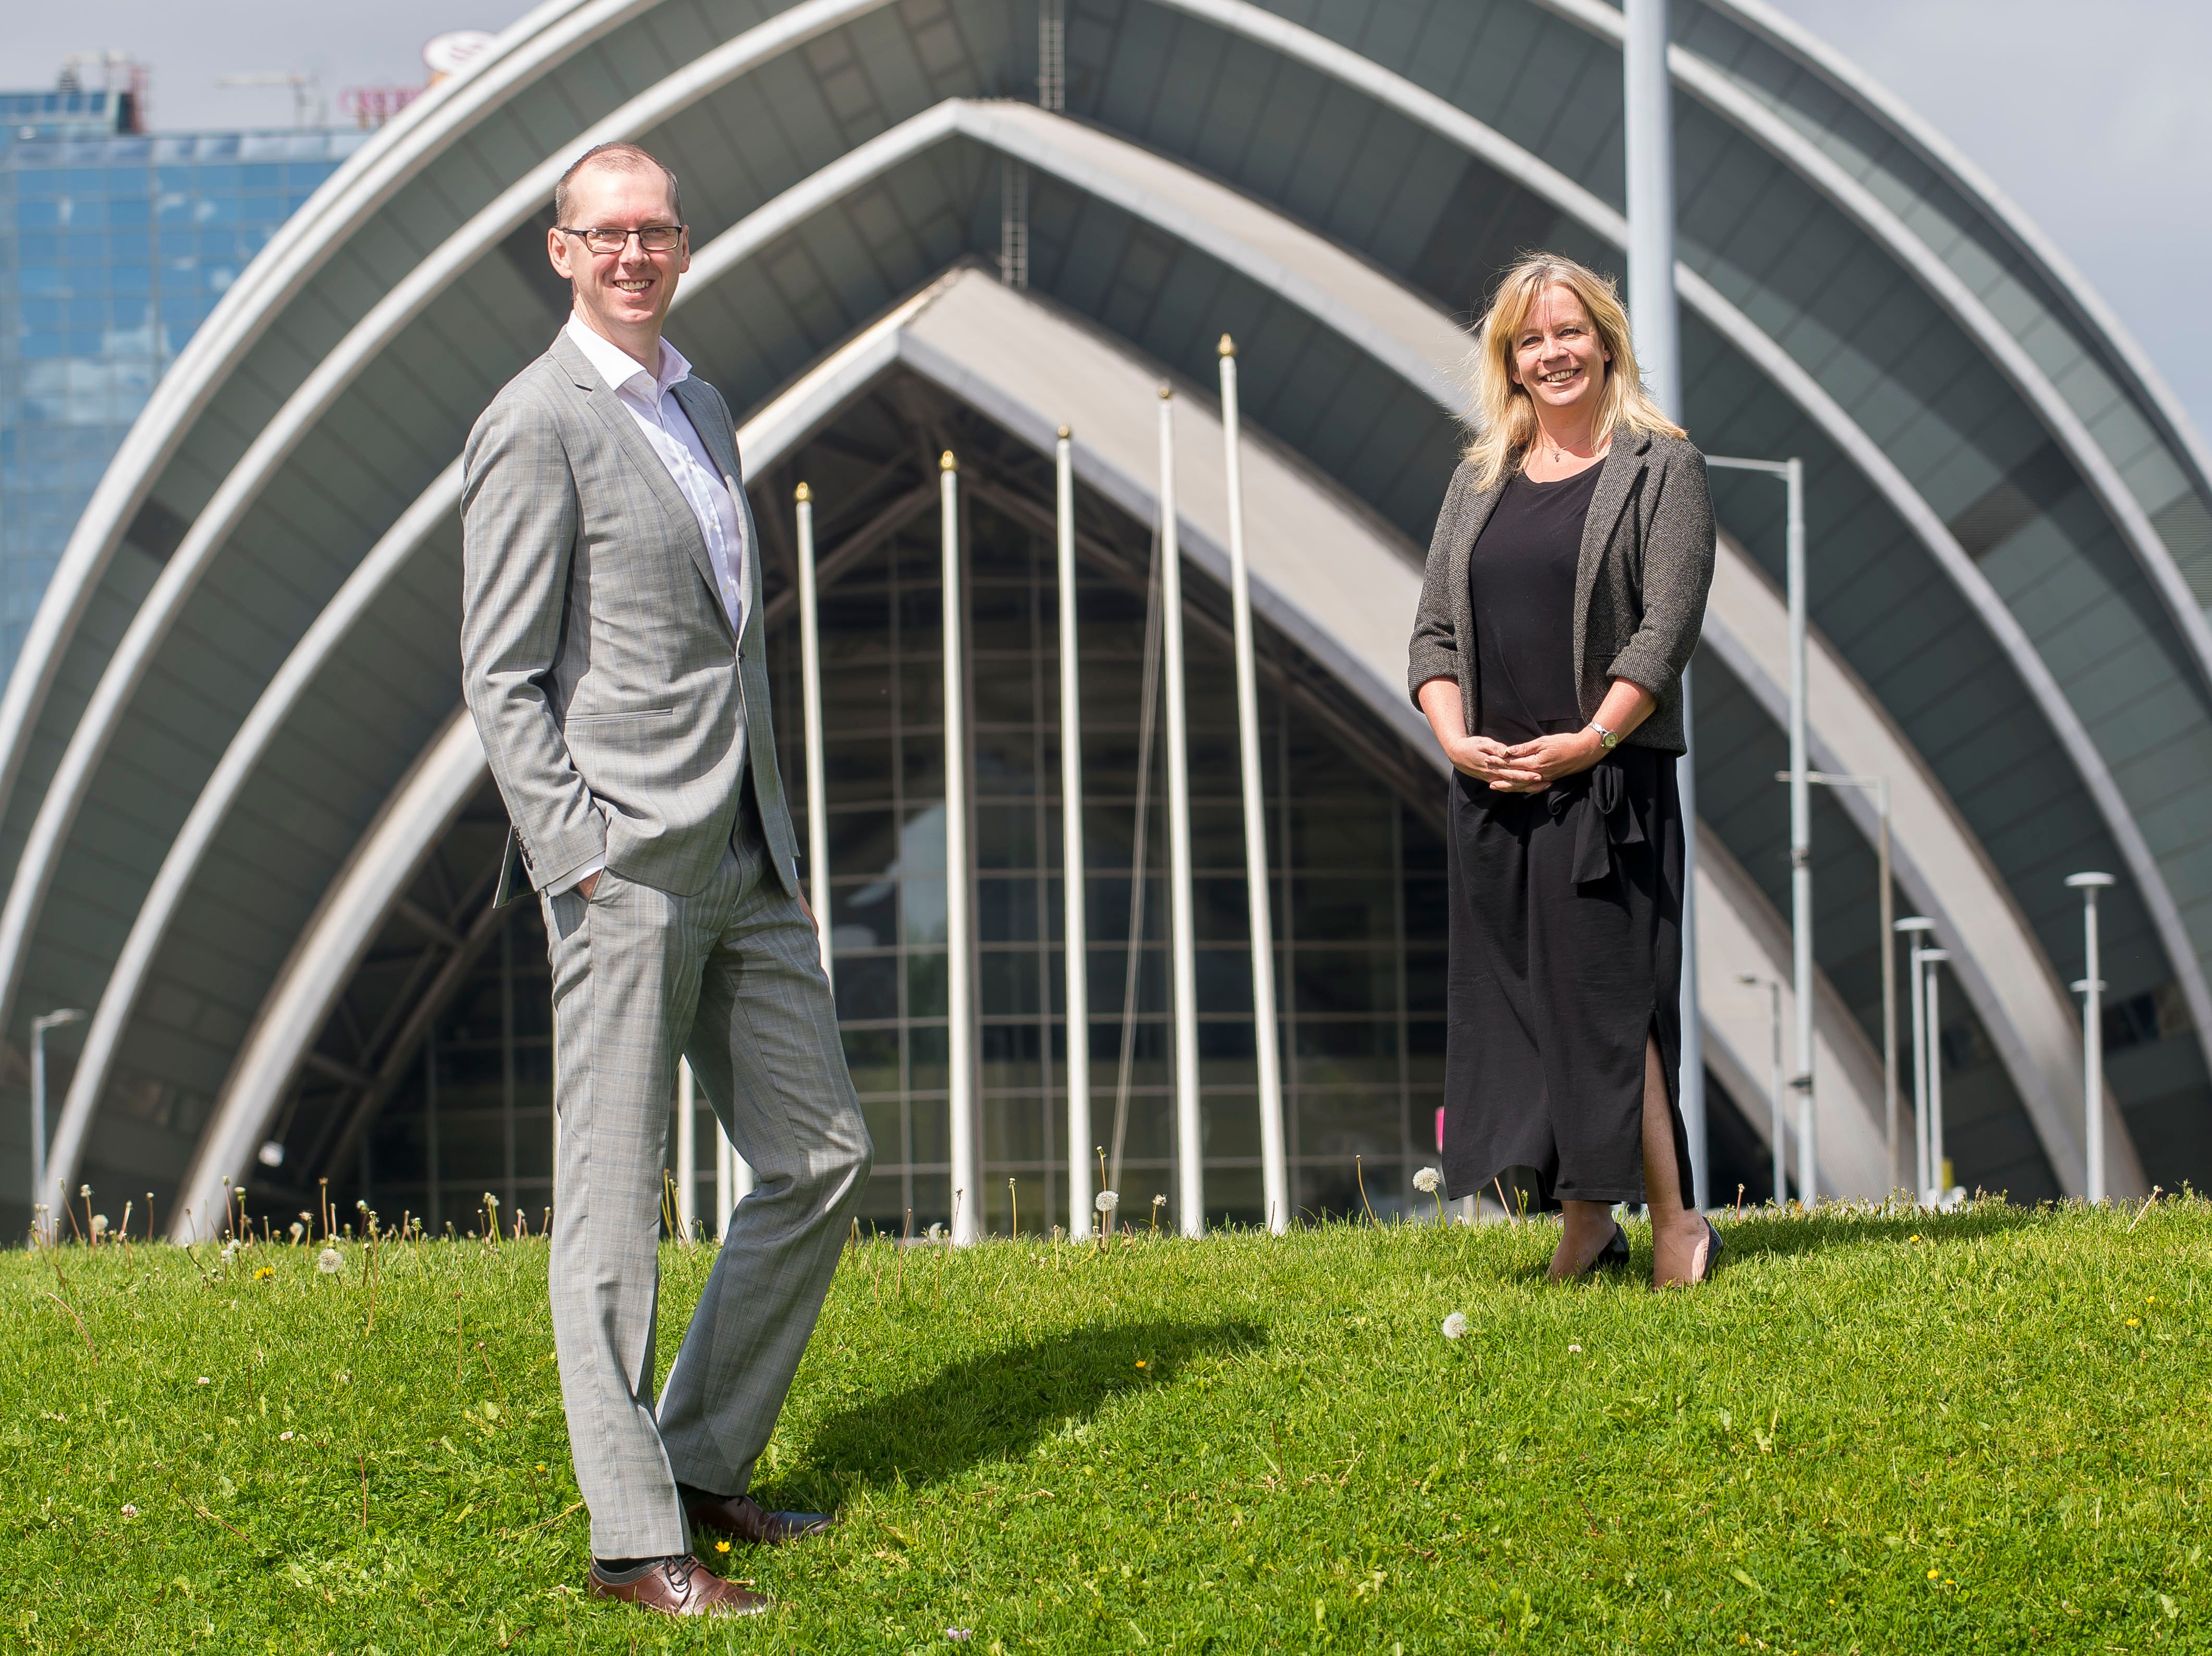 McCrea Financial Services appoints Veronica Thomas and Chris Bain as independent financial advisors